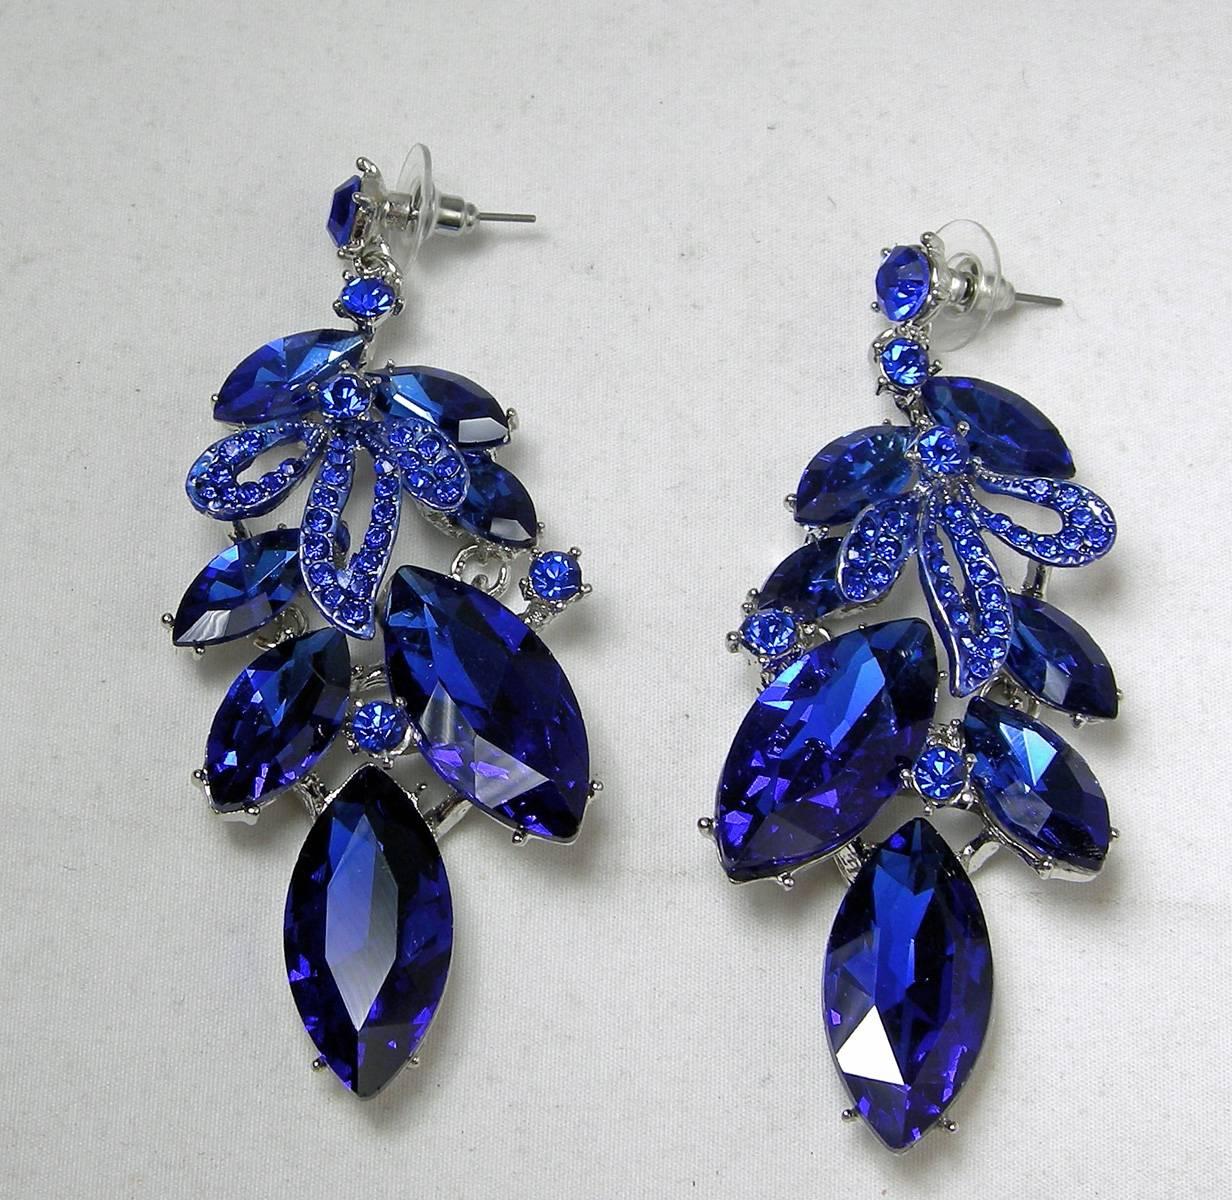 These elegant electric blue pierced earrings are real show-stoppers.  They are in a silver tone setting with sparkling prong set blue rhinestones streaming downward. They measure 3” x 1-¼”.  They are in excellent condition.